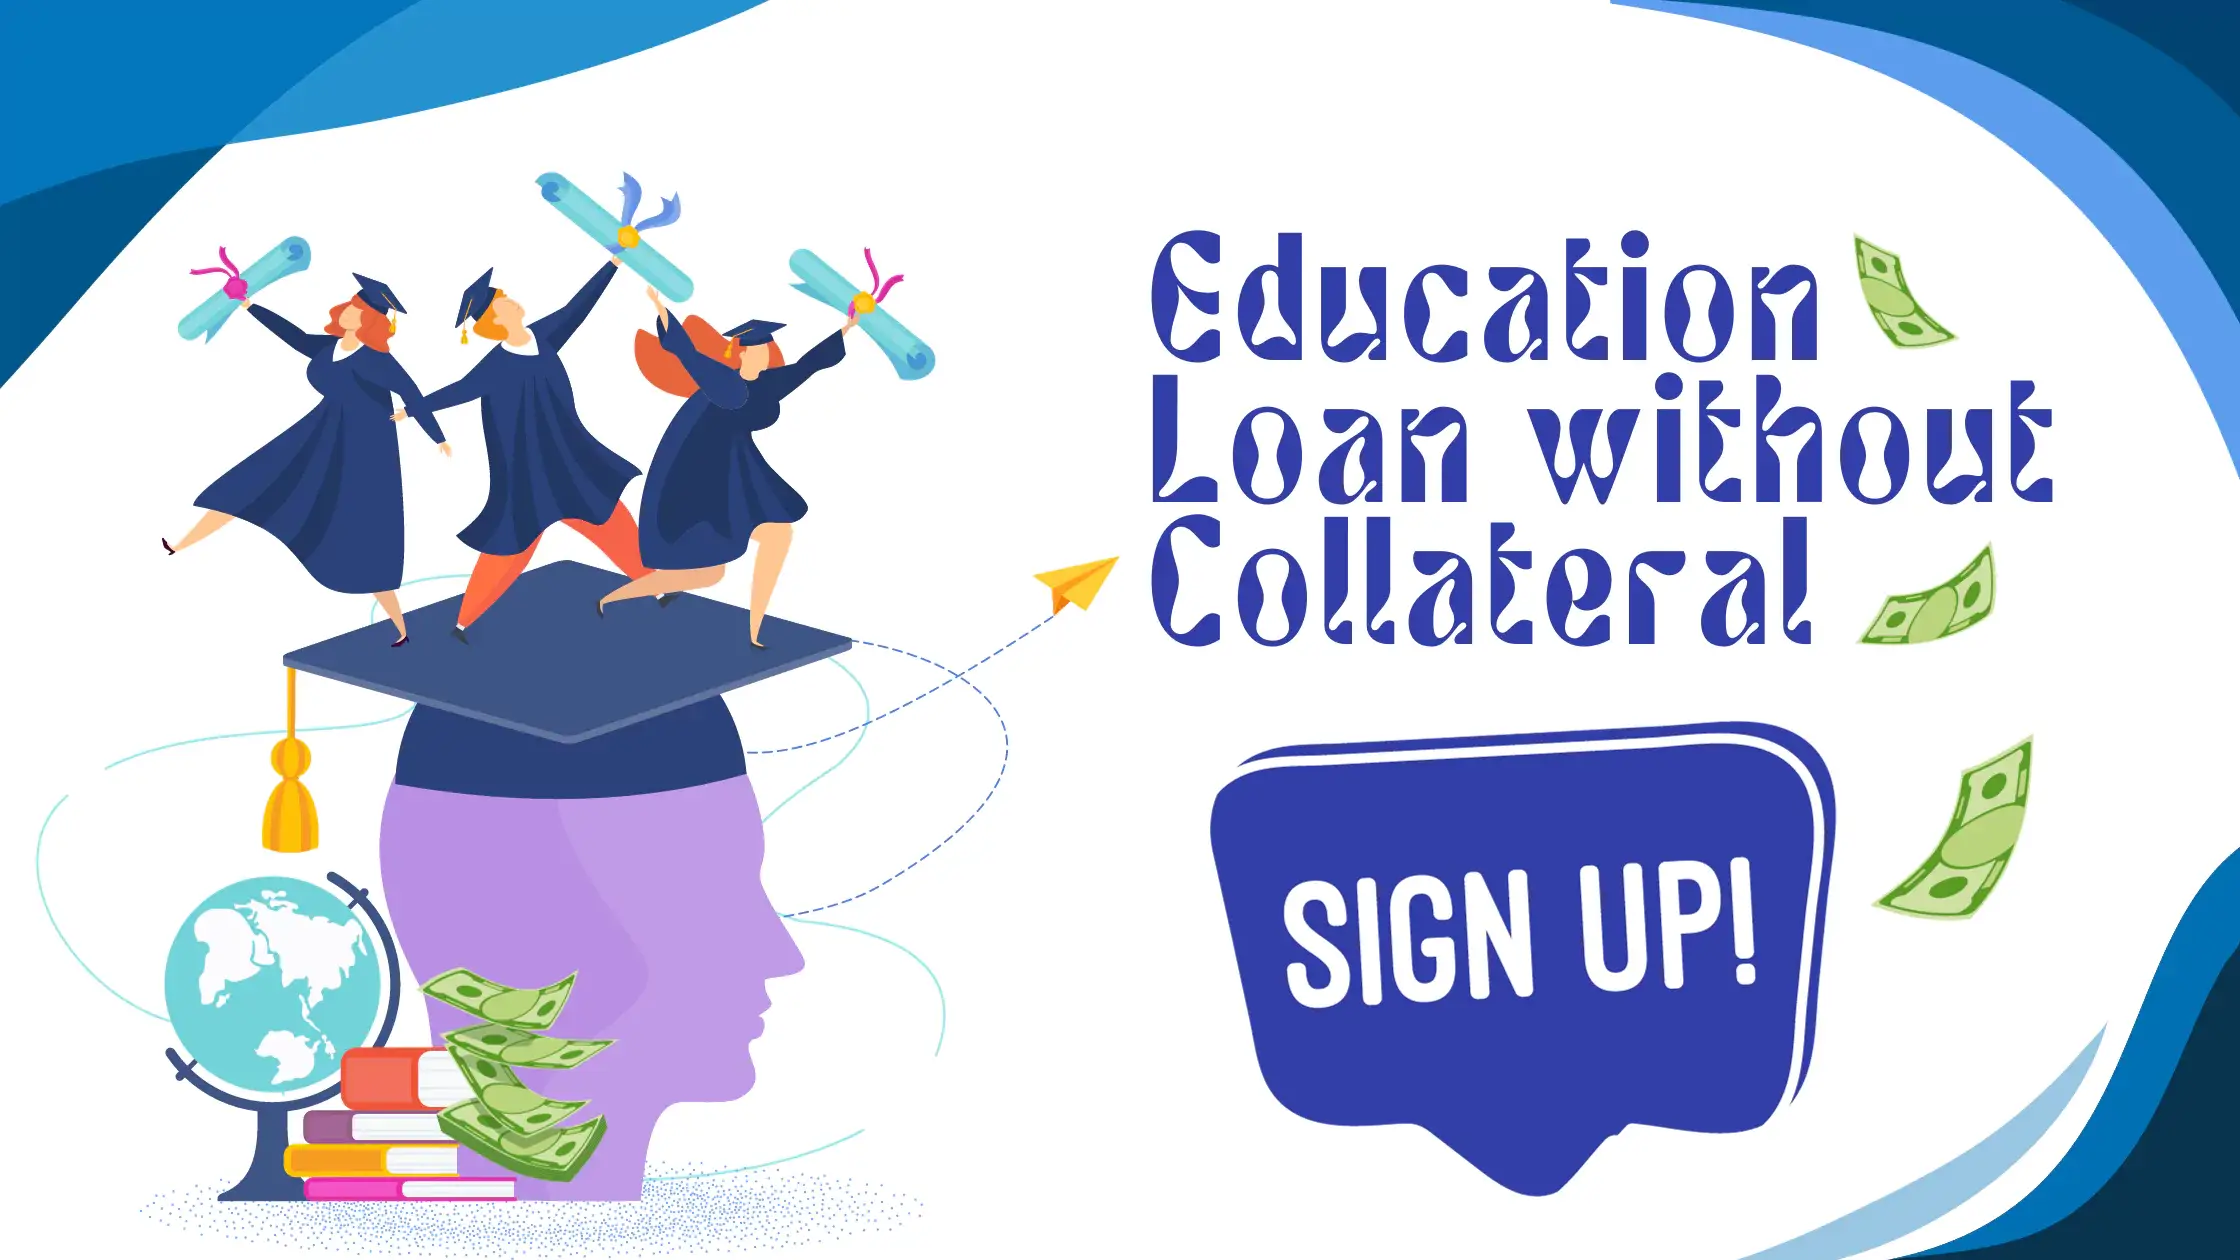 Students are rejoicing about getting an education loan without collateral to study abroad.